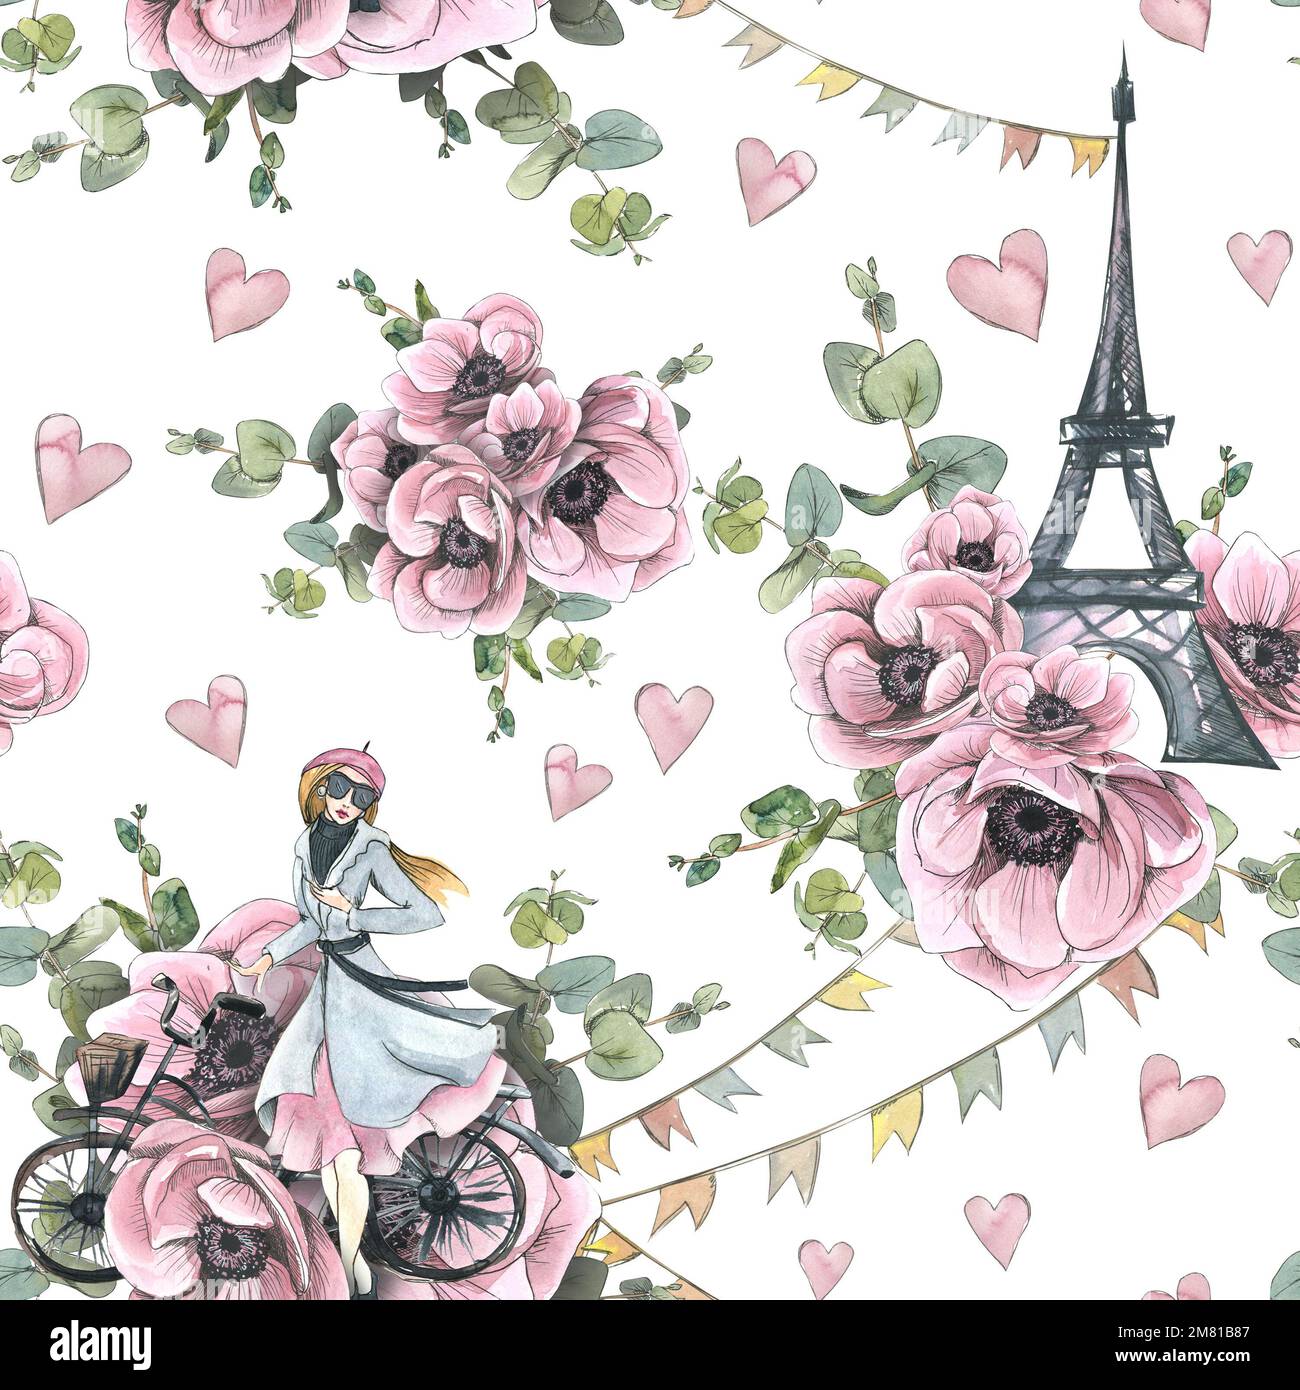 The Eiffel Tower, a Frenchwoman with a bicycle, garlands of flags, hearts and pink anemone flowers with eucalyptus branches. Watercolor illustration Stock Photo